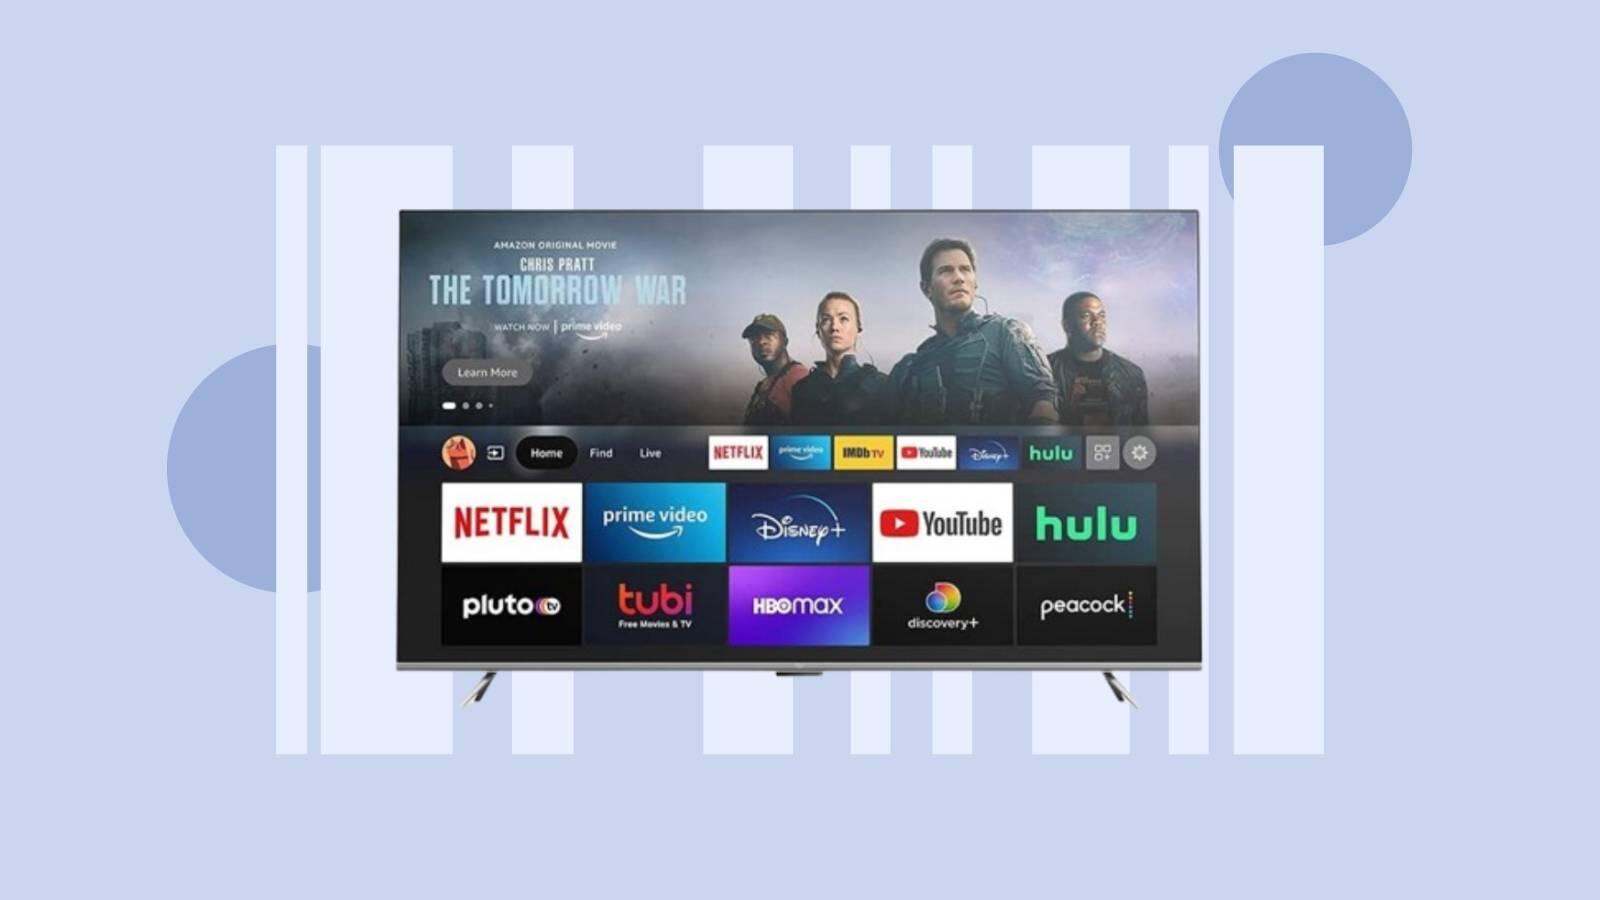 Best Cheap TV Deals: Save Up to $150 on TCL, Toshiba, Hisense and More -  CNET